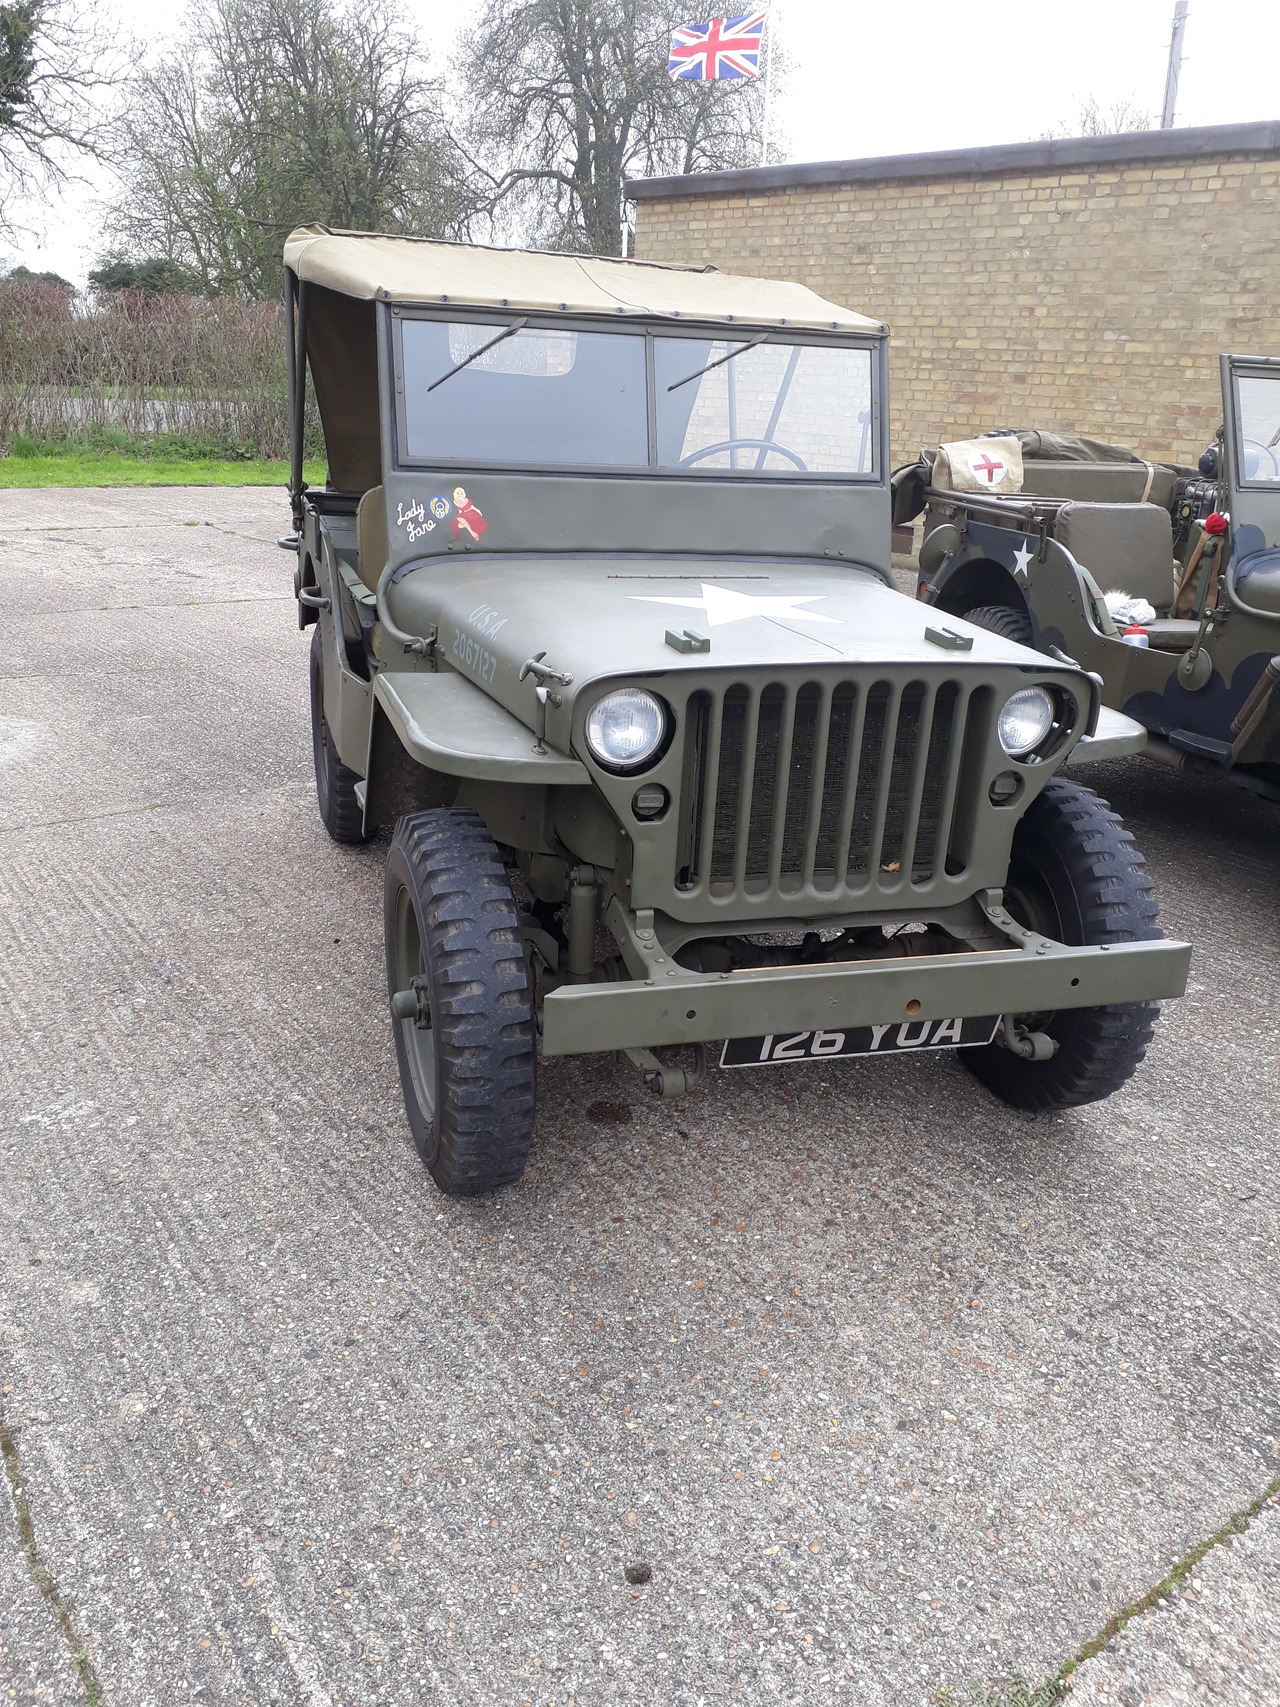 garrandheyford:  We had a few jeeps stop by last Sunday. At our open day in September,